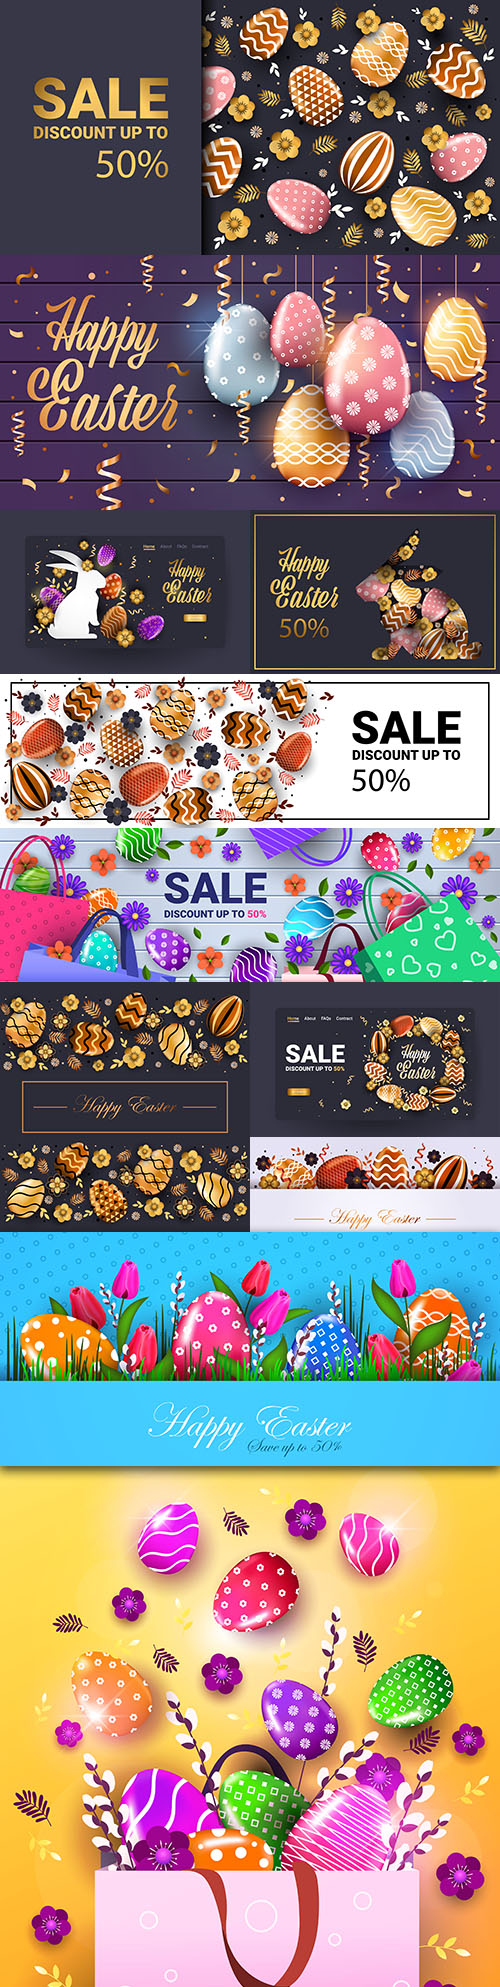 Happy Easter sale banner with decorative eggs and flowers